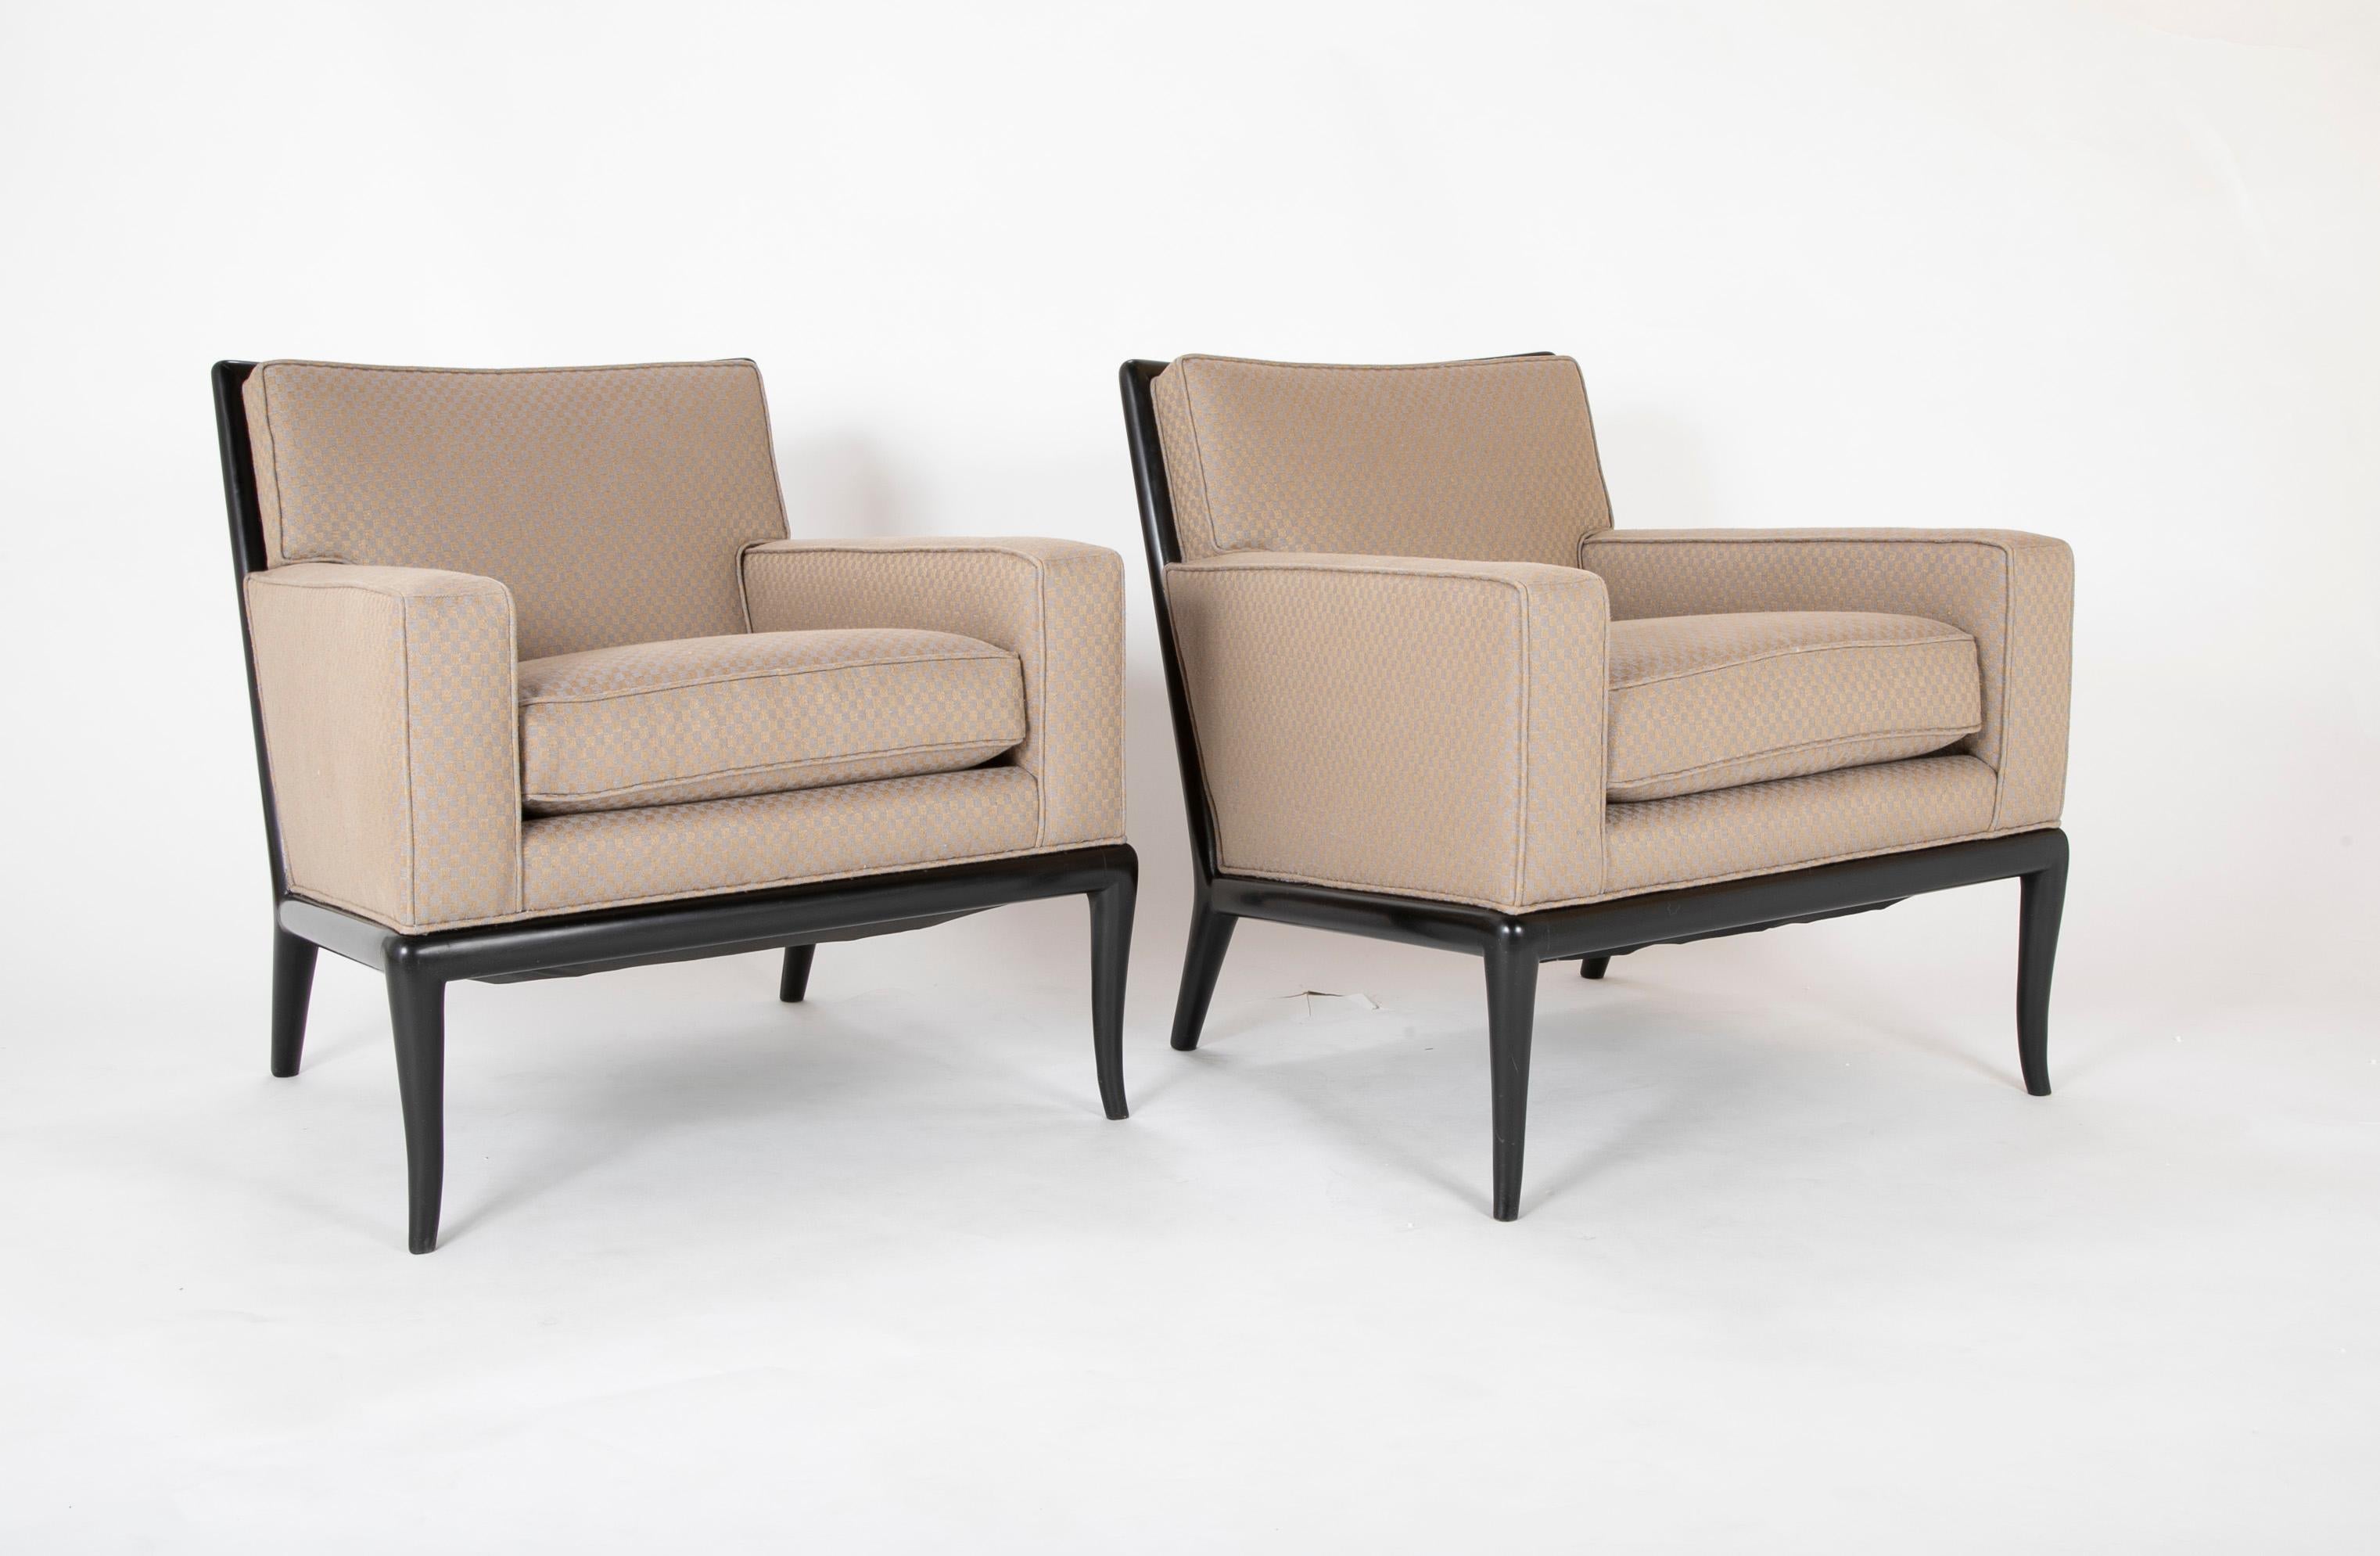 A pair of armchairs newly upholstered in Rogers and Goffigon fabric. Having ebonized frames, designed by T.H. Robsjohn Gibbings. Newly reupholstered in Rogers and Goffigon fabric.